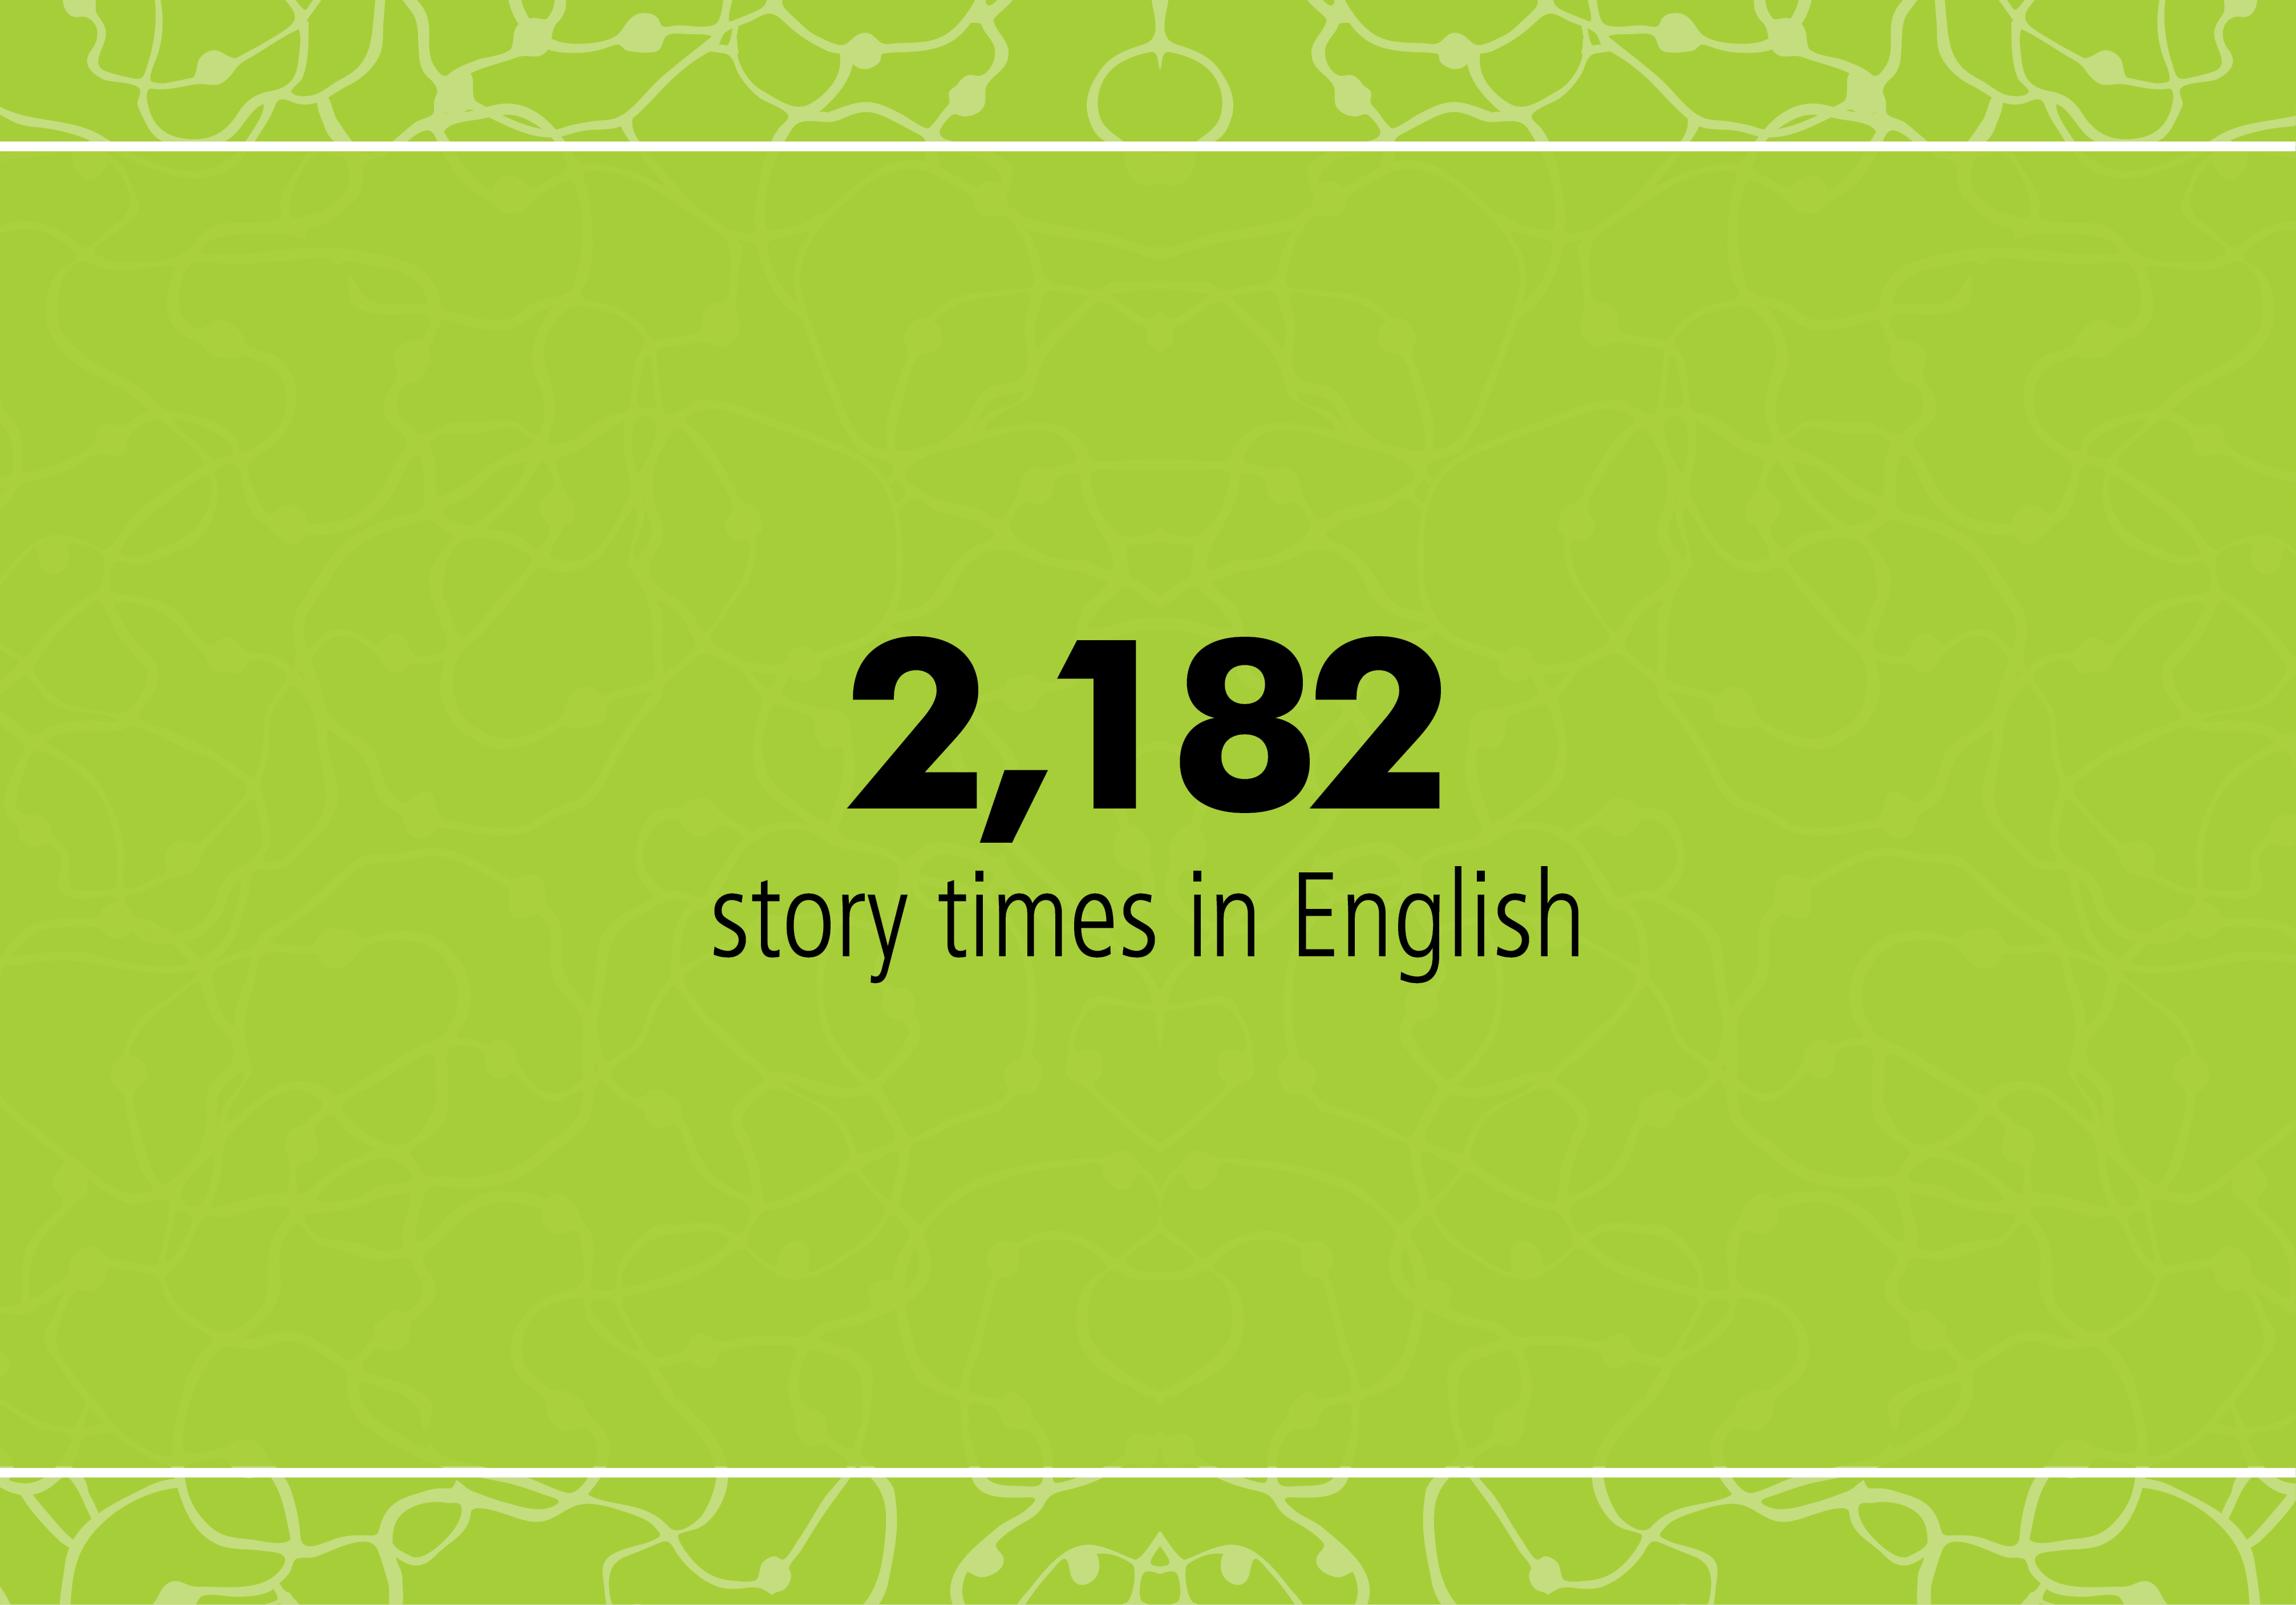 2,182 story times offered in English